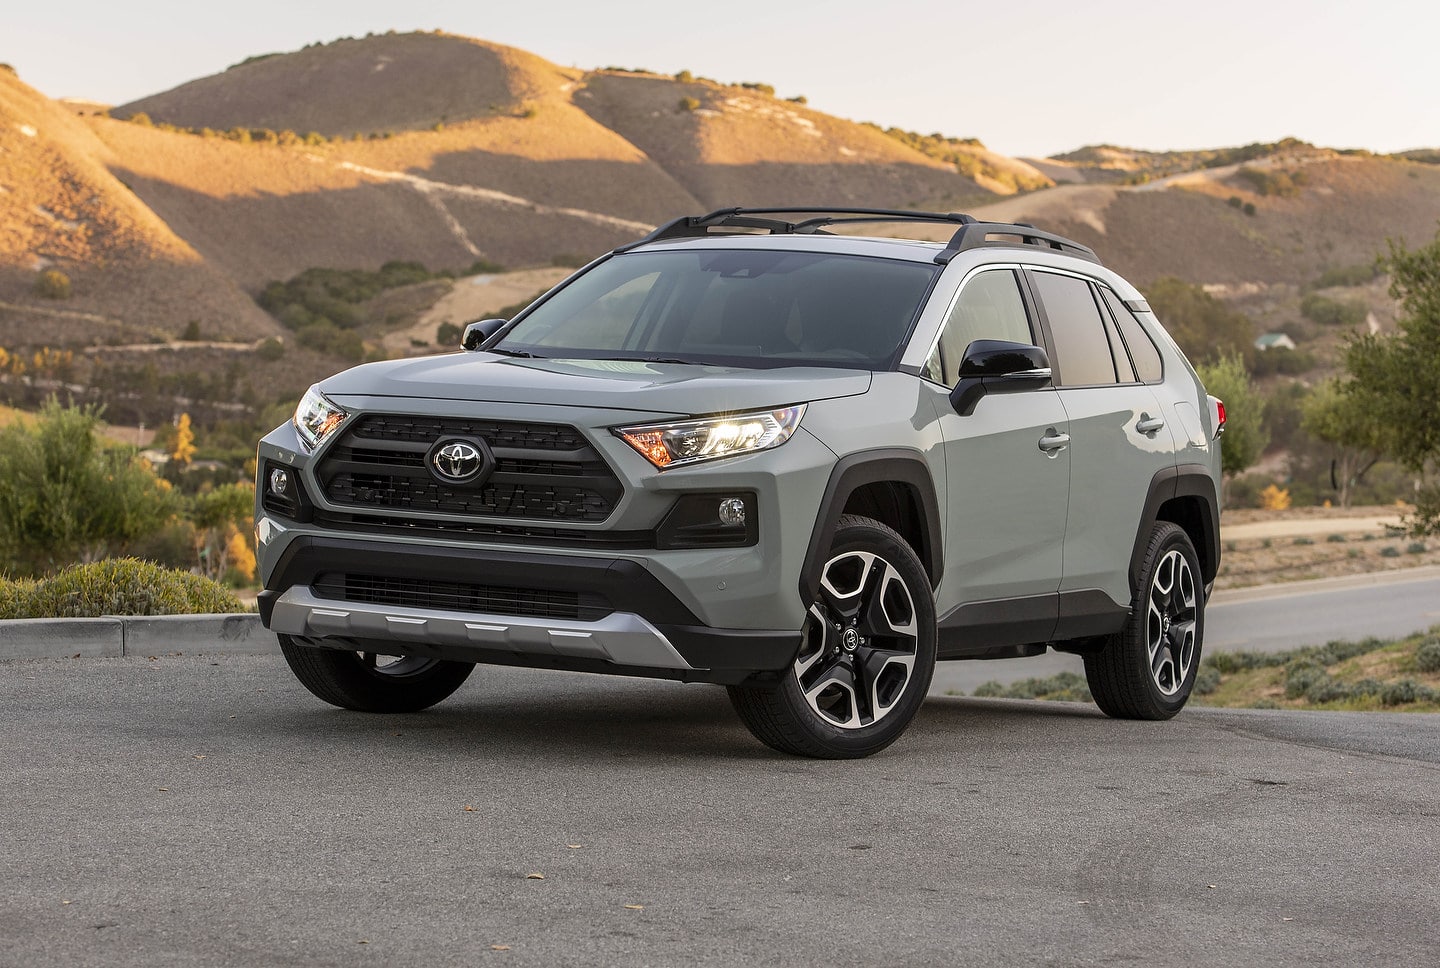 5 questions about the 2019 Toyota RAV4 answered - Motor Illustrated